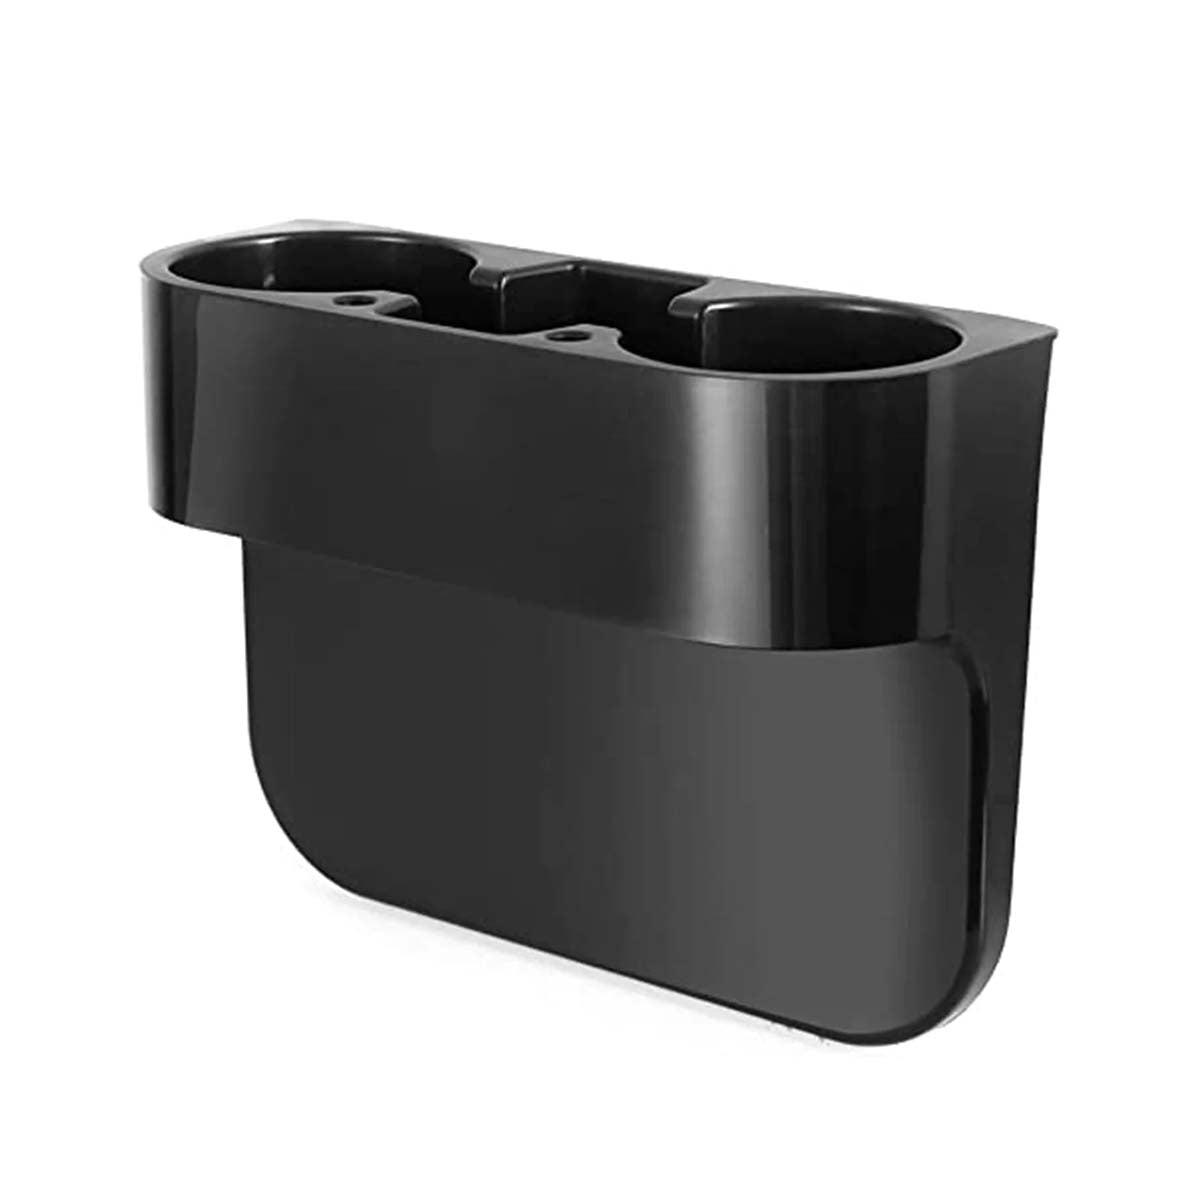 Cup Holder Portable Multifunction Vehicle Seat Cup Cell Phone Drinks Holder Box Car Interior Organizer, Compatible with All Cars, Car Accessories CC11995